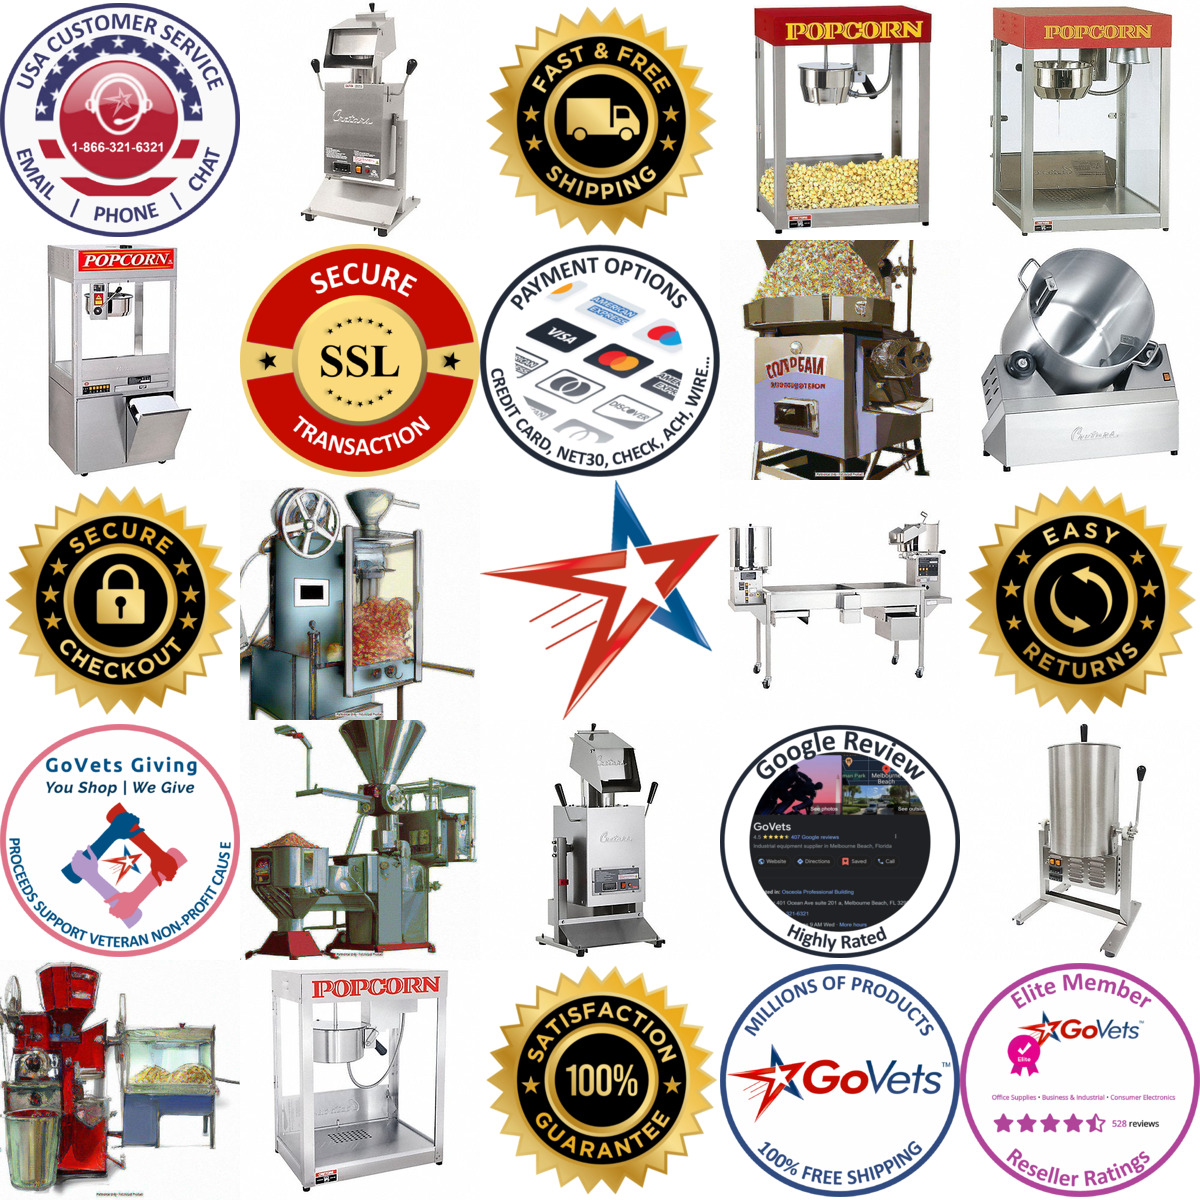 A selection of Popcorn Makers products on GoVets